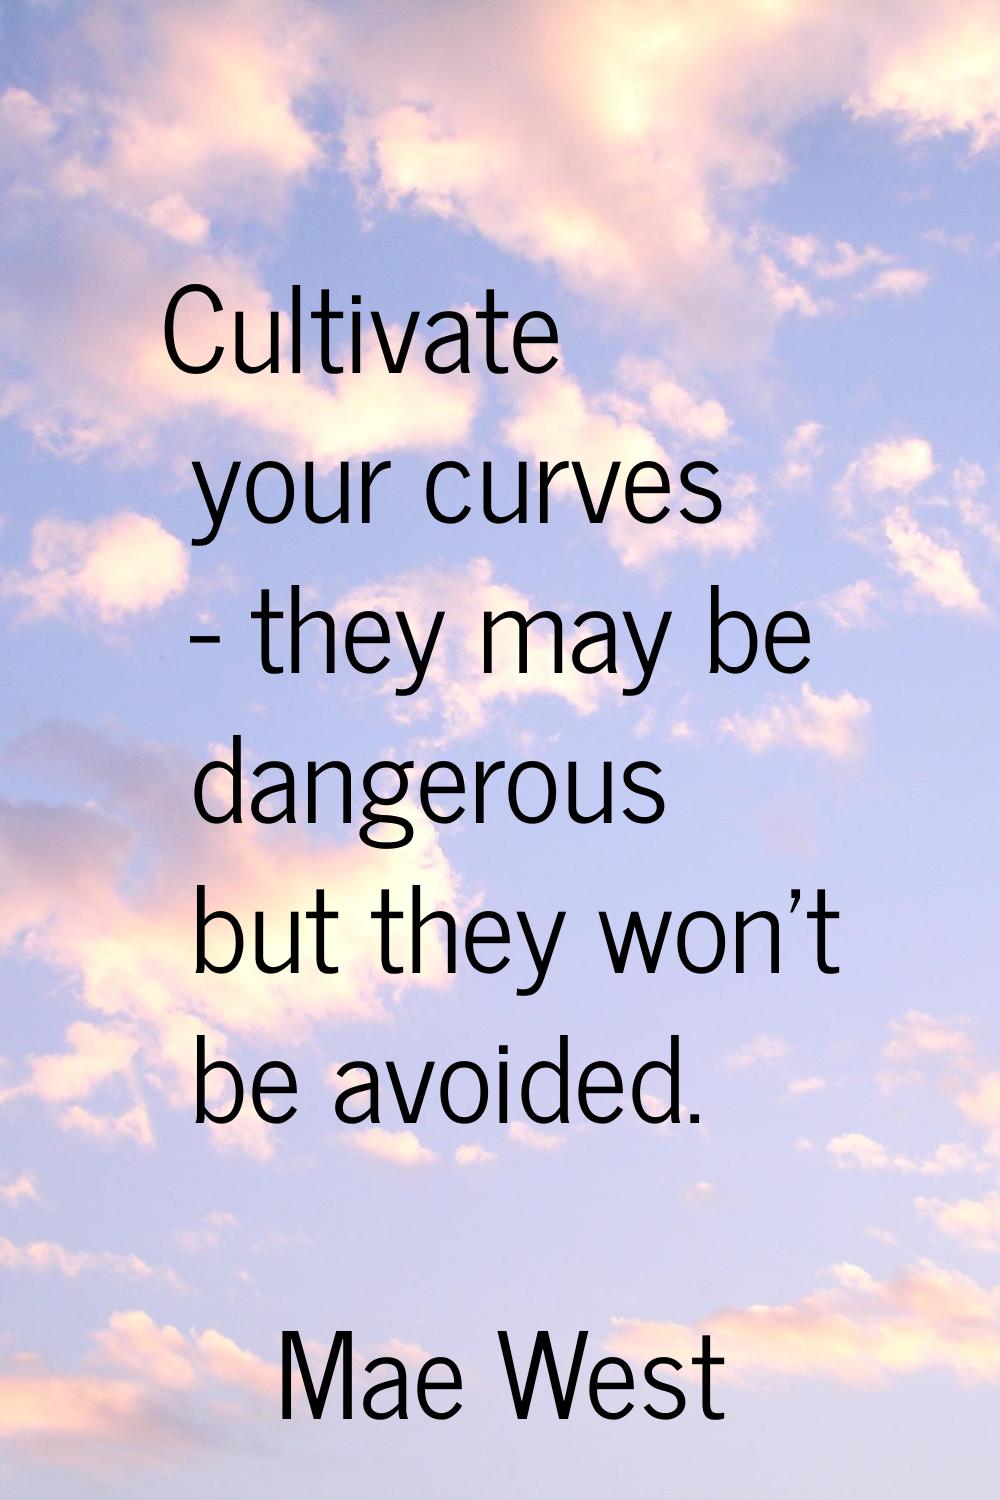 Cultivate your curves - they may be dangerous but they won't be avoided.